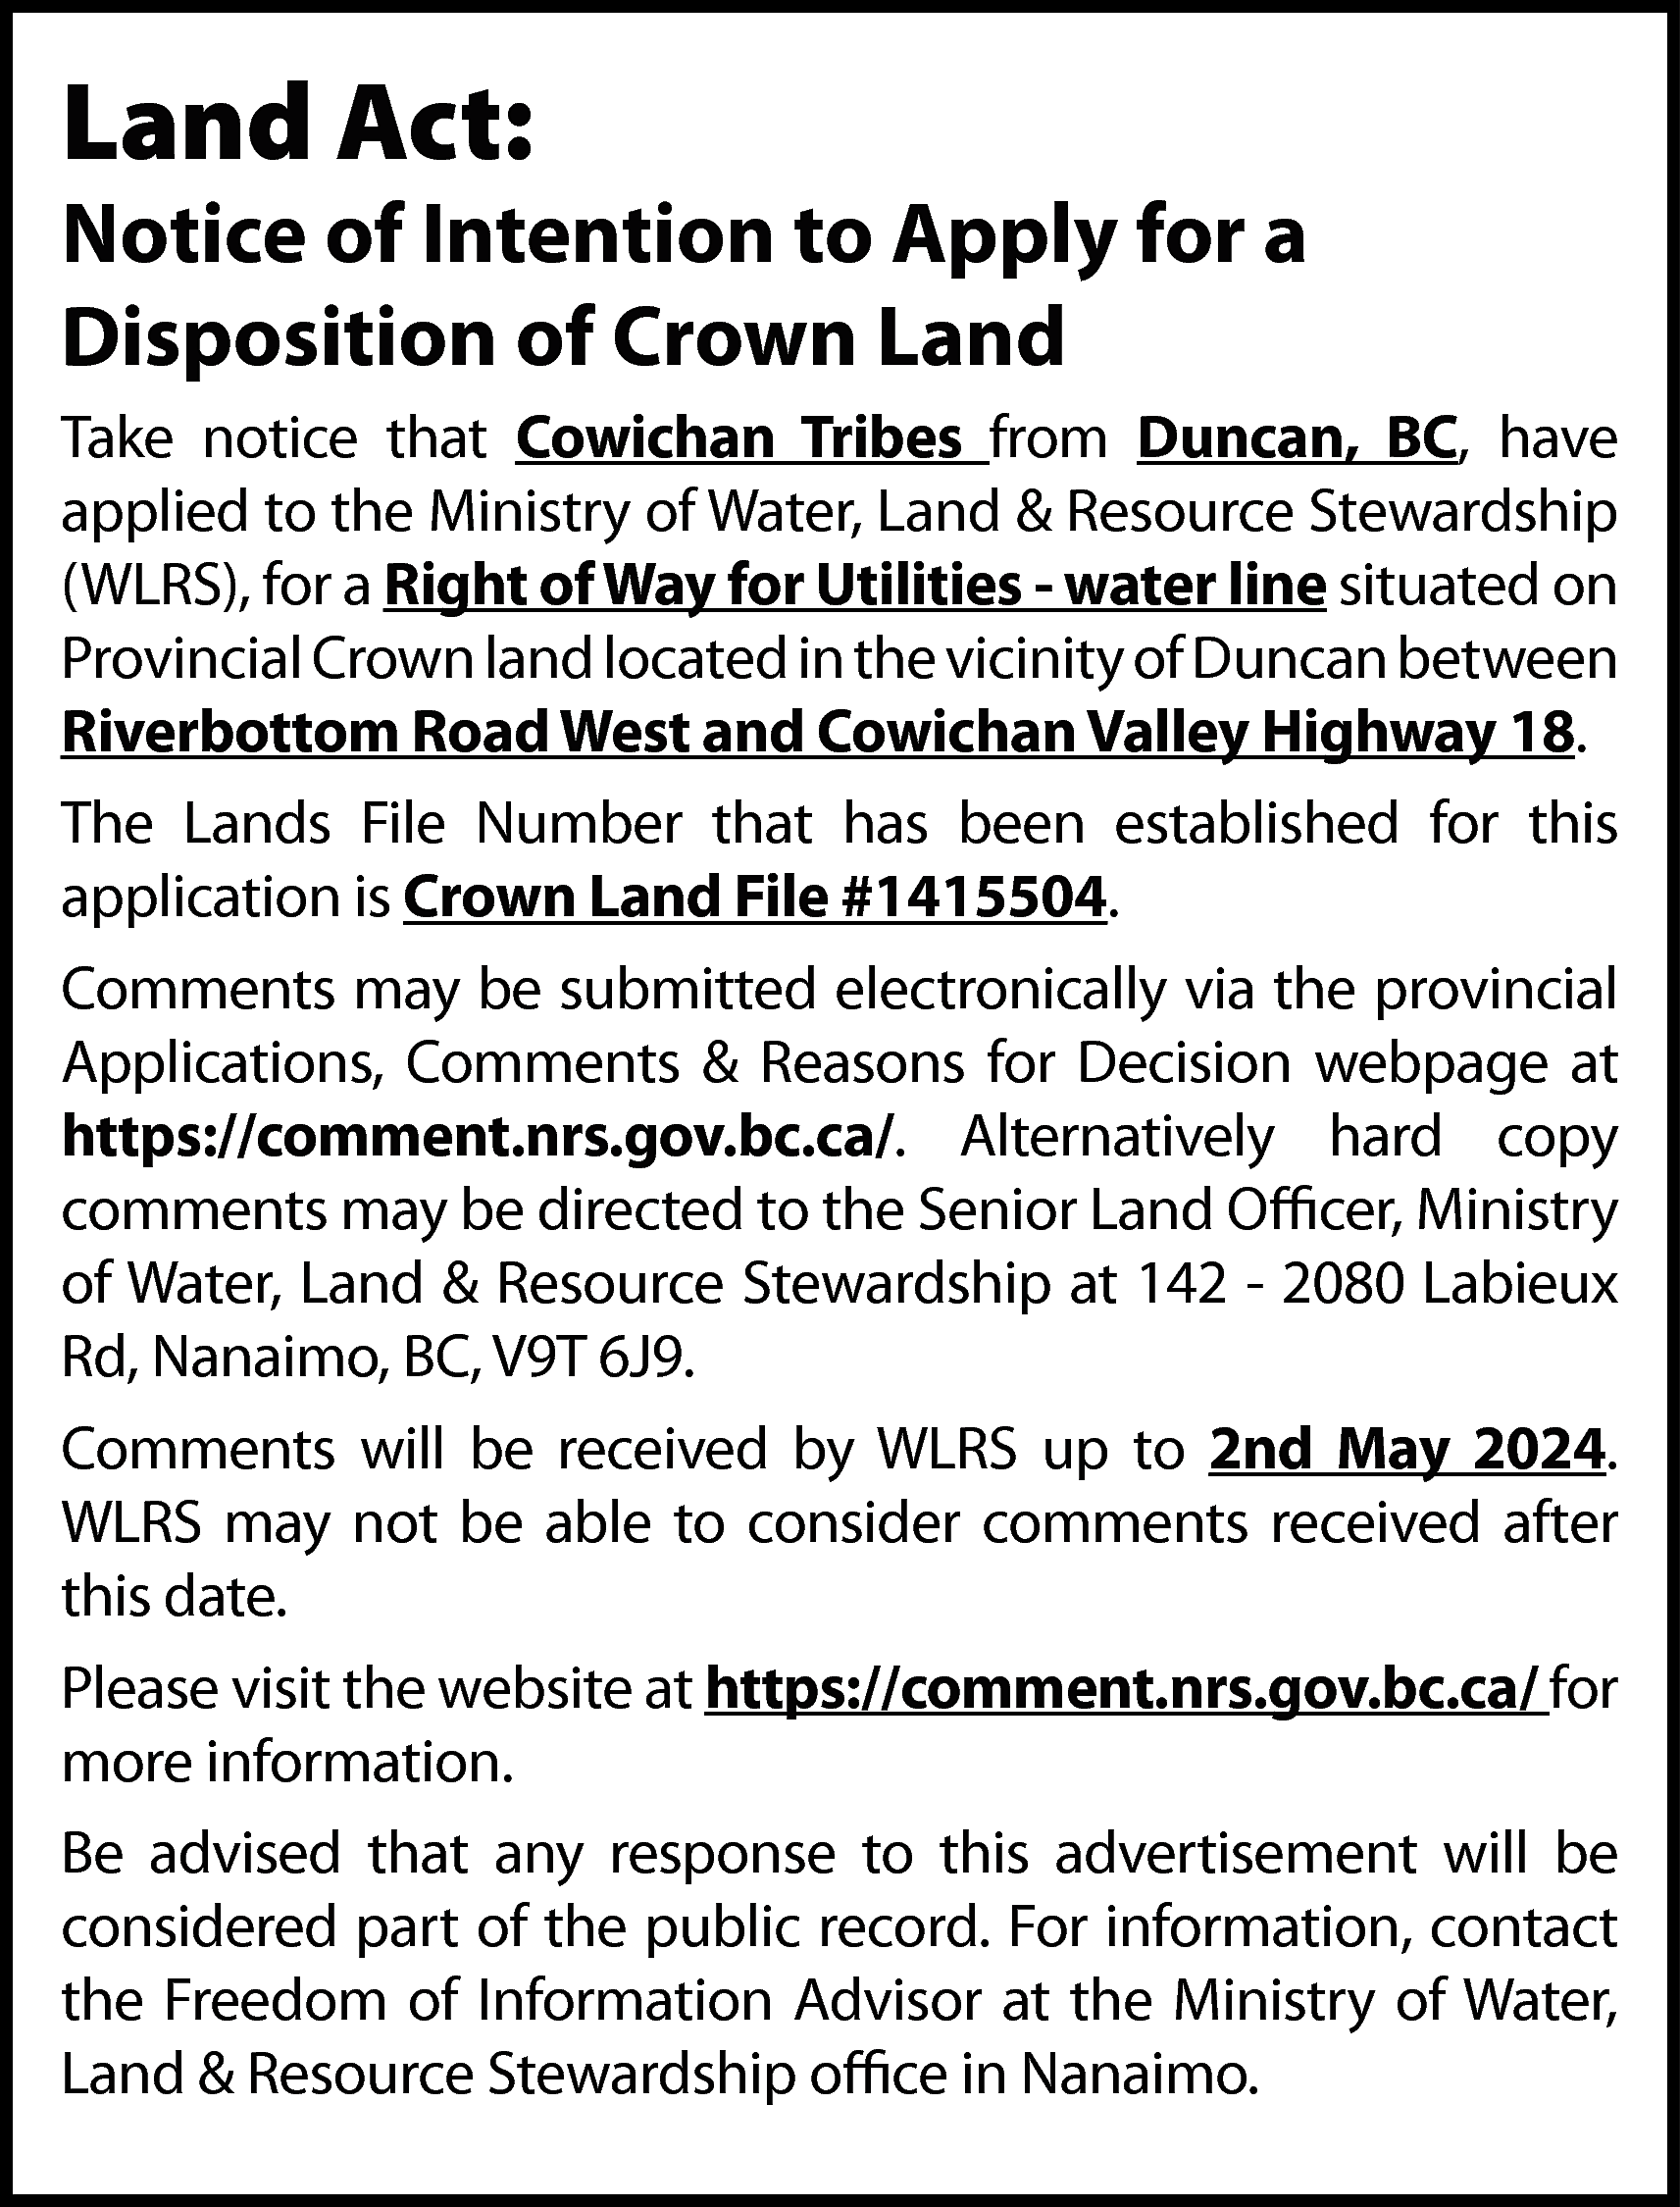 Land Act: <br> <br>Notice of  Land Act:    Notice of Intention to Apply for a  Disposition of Crown Land  Take notice that Cowichan Tribes from Duncan, BC, have  applied to the Ministry of Water, Land & Resource Stewardship  (WLRS), for a Right of Way for Utilities - water line situated on  Provincial Crown land located in the vicinity of Duncan between  Riverbottom Road West and Cowichan Valley Highway 18.  The Lands File Number that has been established for this  application is Crown Land File #1415504.  Comments may be submitted electronically via the provincial  Applications, Comments & Reasons for Decision webpage at  https://comment.nrs.gov.bc.ca/. Alternatively hard copy  comments may be directed to the Senior Land Officer, Ministry  of Water, Land & Resource Stewardship at 142 - 2080 Labieux  Rd, Nanaimo, BC, V9T 6J9.  Comments will be received by WLRS up to 2nd May 2024.  WLRS may not be able to consider comments received after  this date.  Please visit the website at https://comment.nrs.gov.bc.ca/ for  more information.  Be advised that any response to this advertisement will be  considered part of the public record. For information, contact  the Freedom of Information Advisor at the Ministry of Water,  Land & Resource Stewardship office in Nanaimo.    